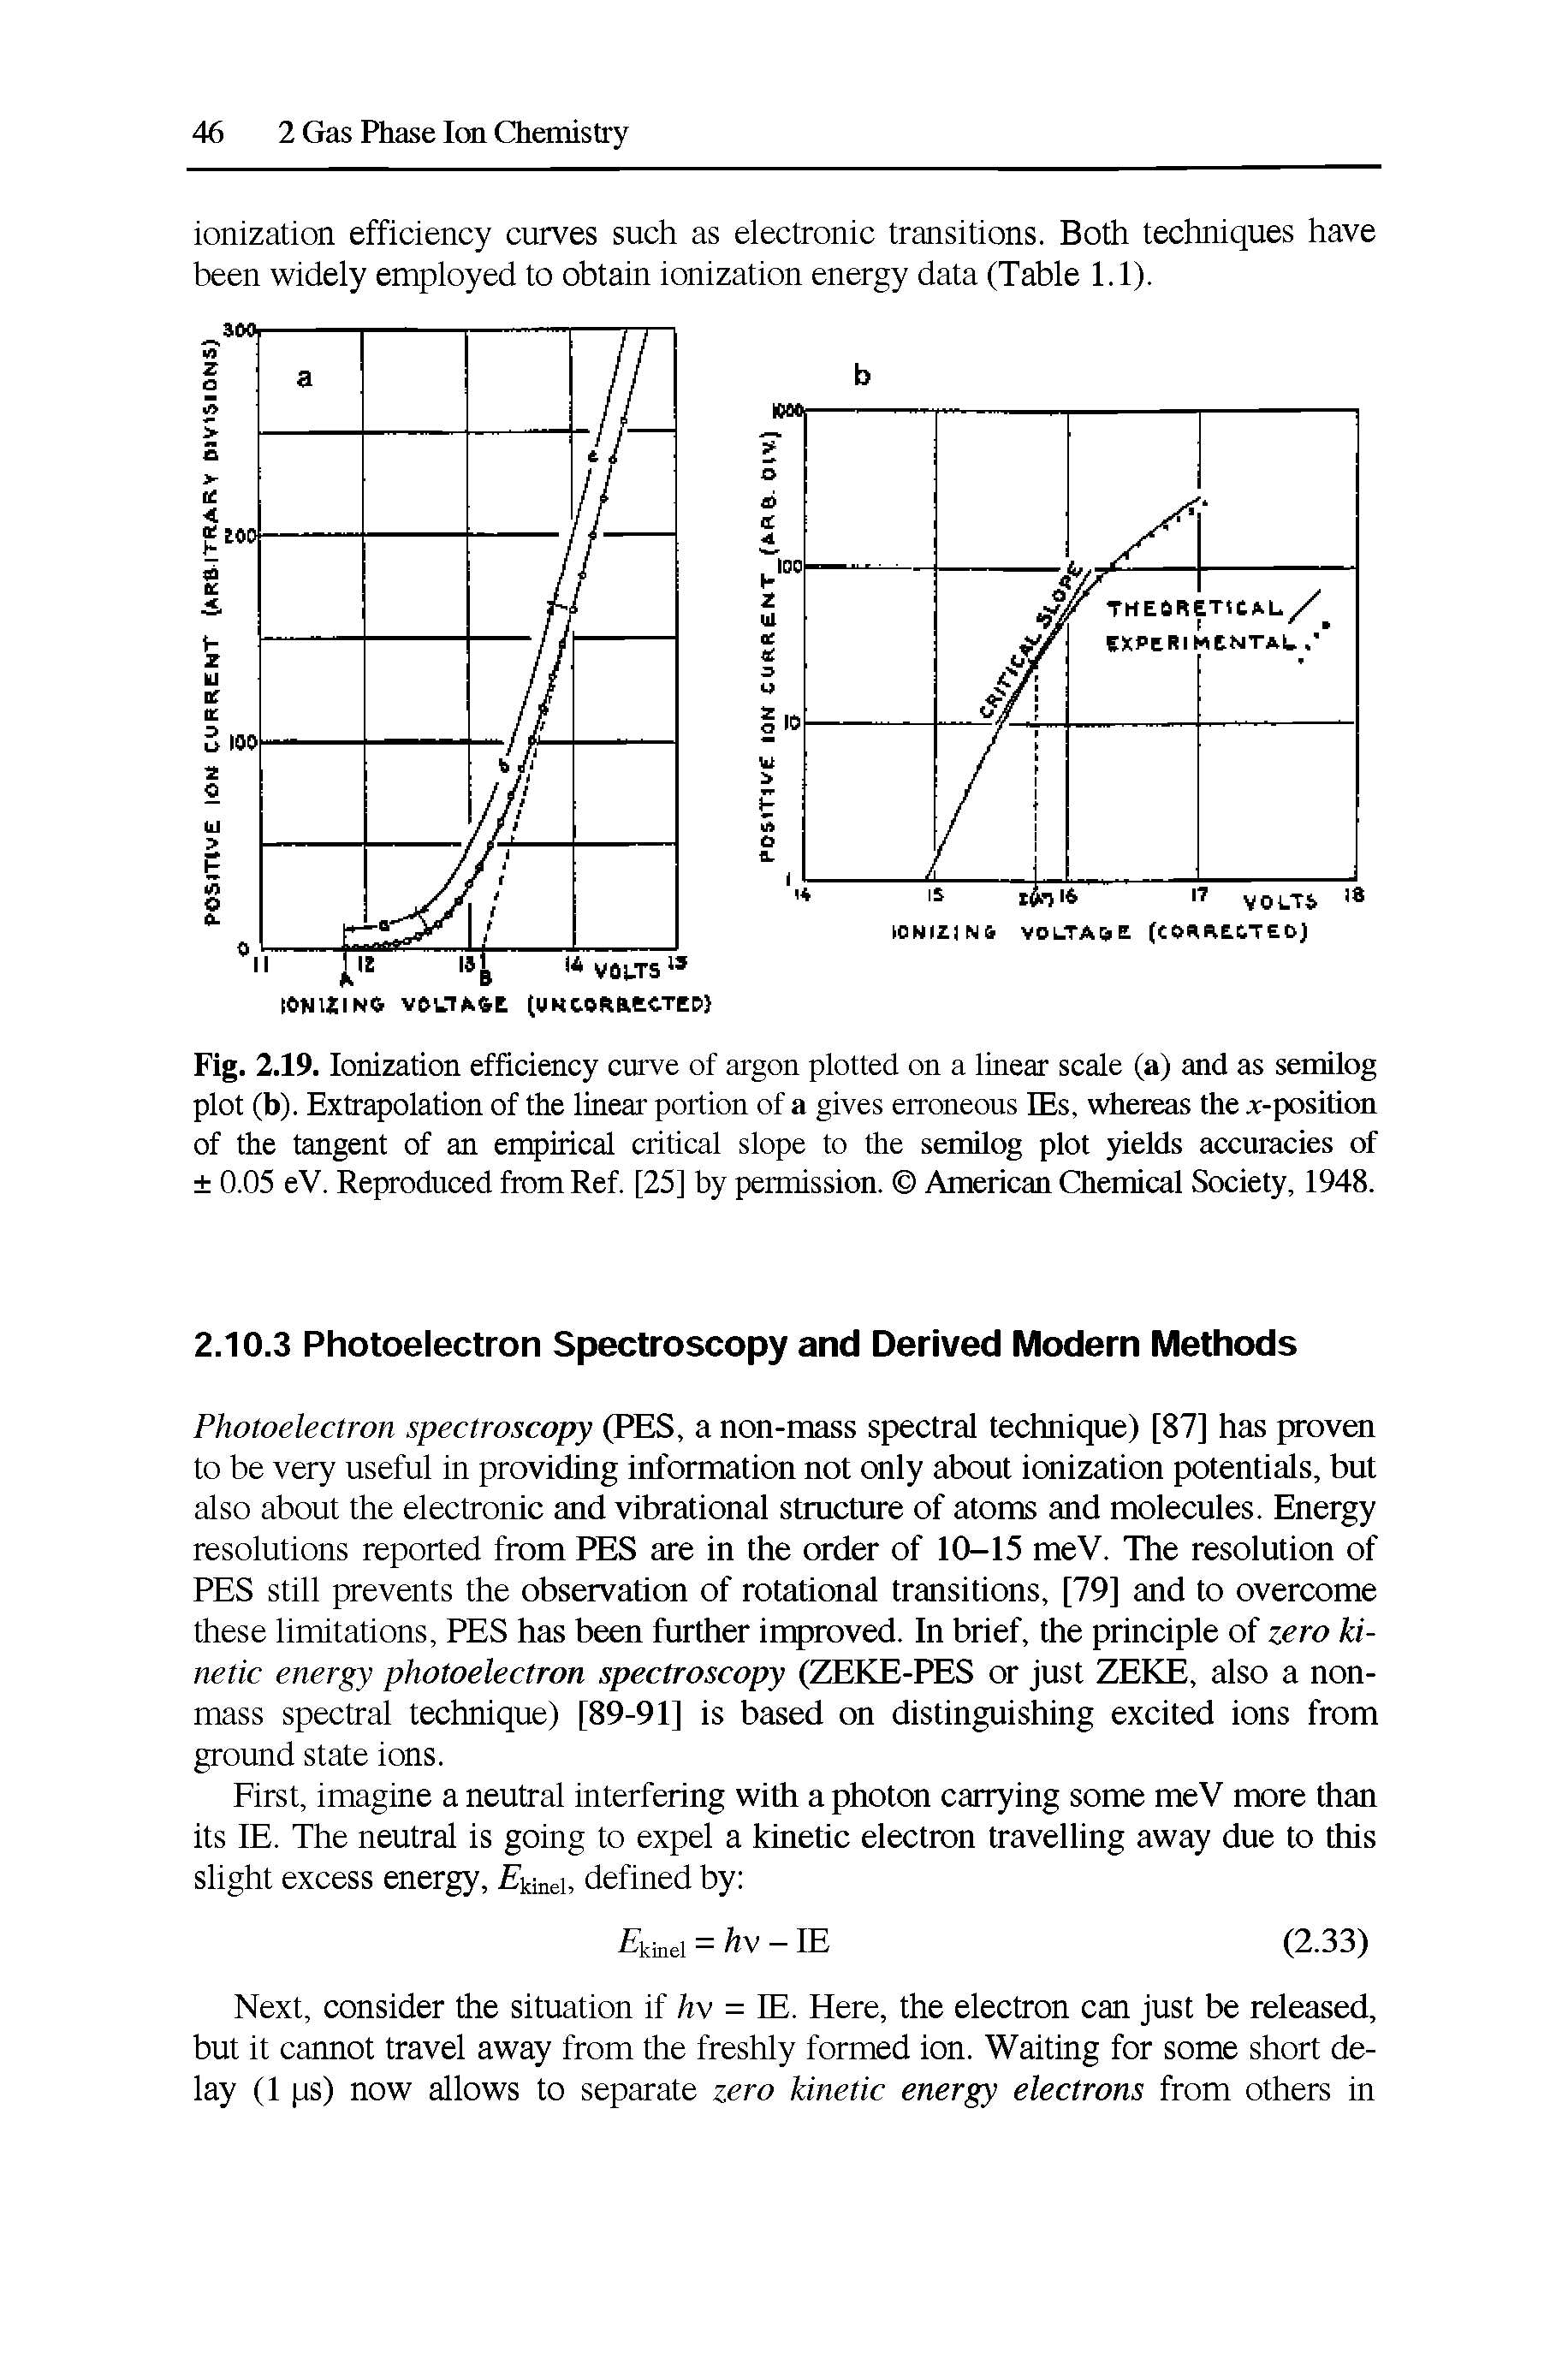 Fig. 2.19. Ionization efficiency curve of argon plotted on a linear scale (a) and as semilog plot (b). Extrapolation of the linear portion of a gives erroneous IBs, whereas the x-position of the tangent of an empirical critical slope to the sertrilog plot yields accuracies of 0.05 eV. Reproduced from Ref. [25] by permission. American Chemical Society, 1948.